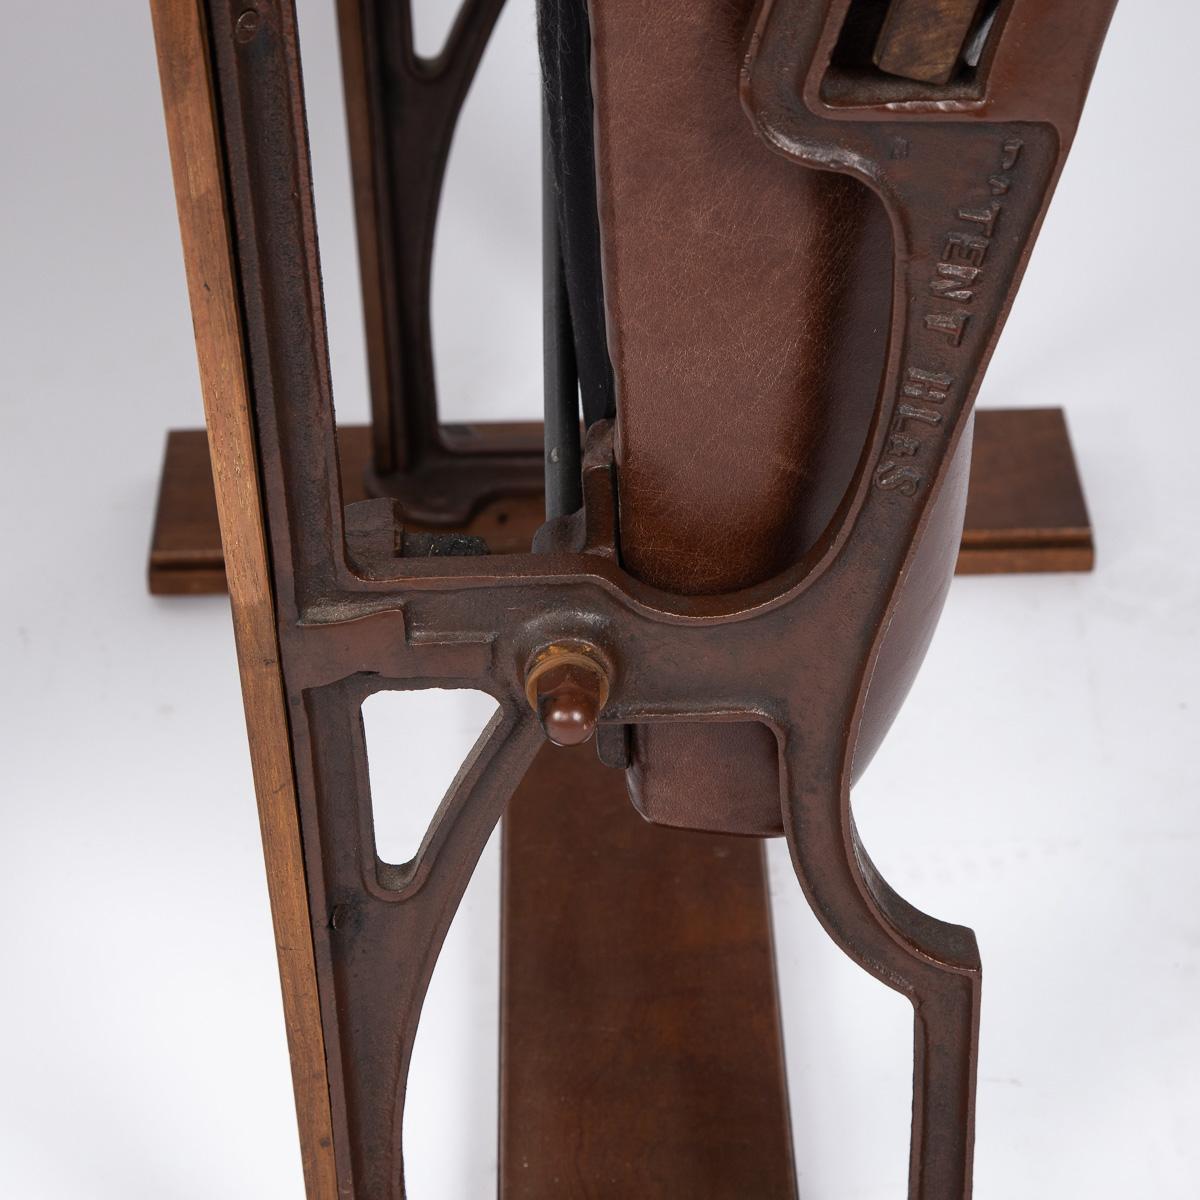 20th Century Edwardian Mahogany and Leather Cinema / Theatre Chairs, circa 1900 For Sale 8